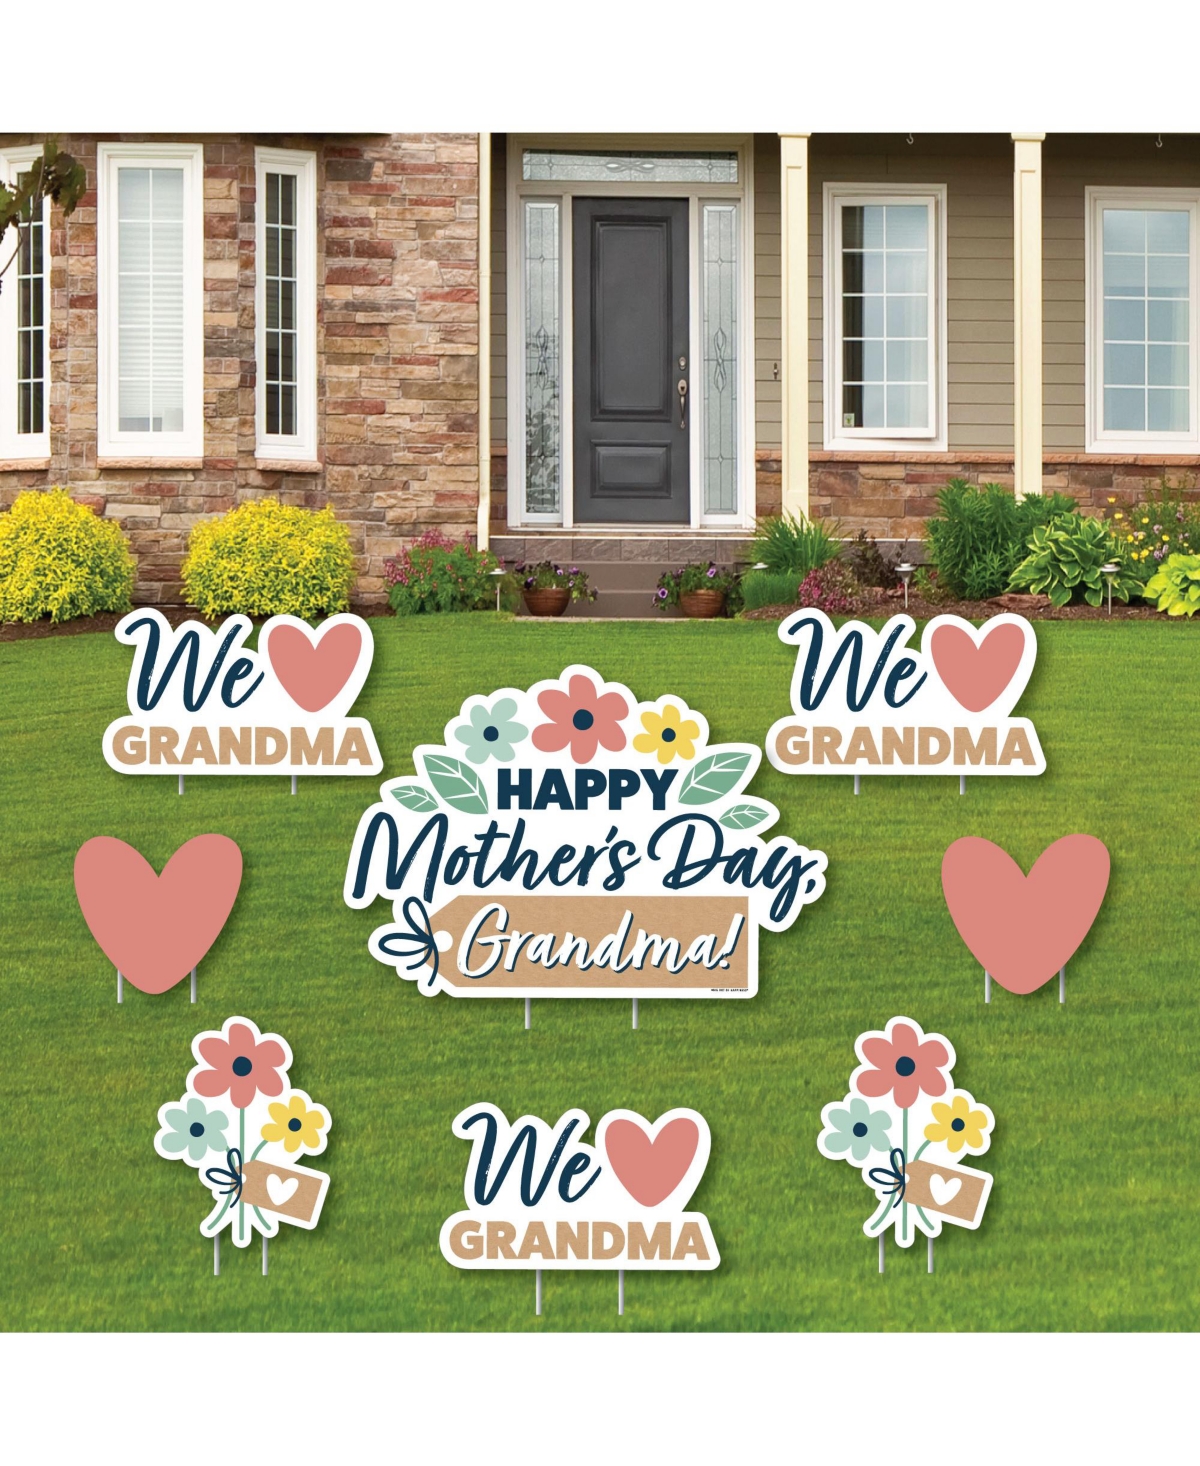 Grandma, Happy Mothers Day - Lawn Decor - We Love Grandmother Yard Signs - 8 ct